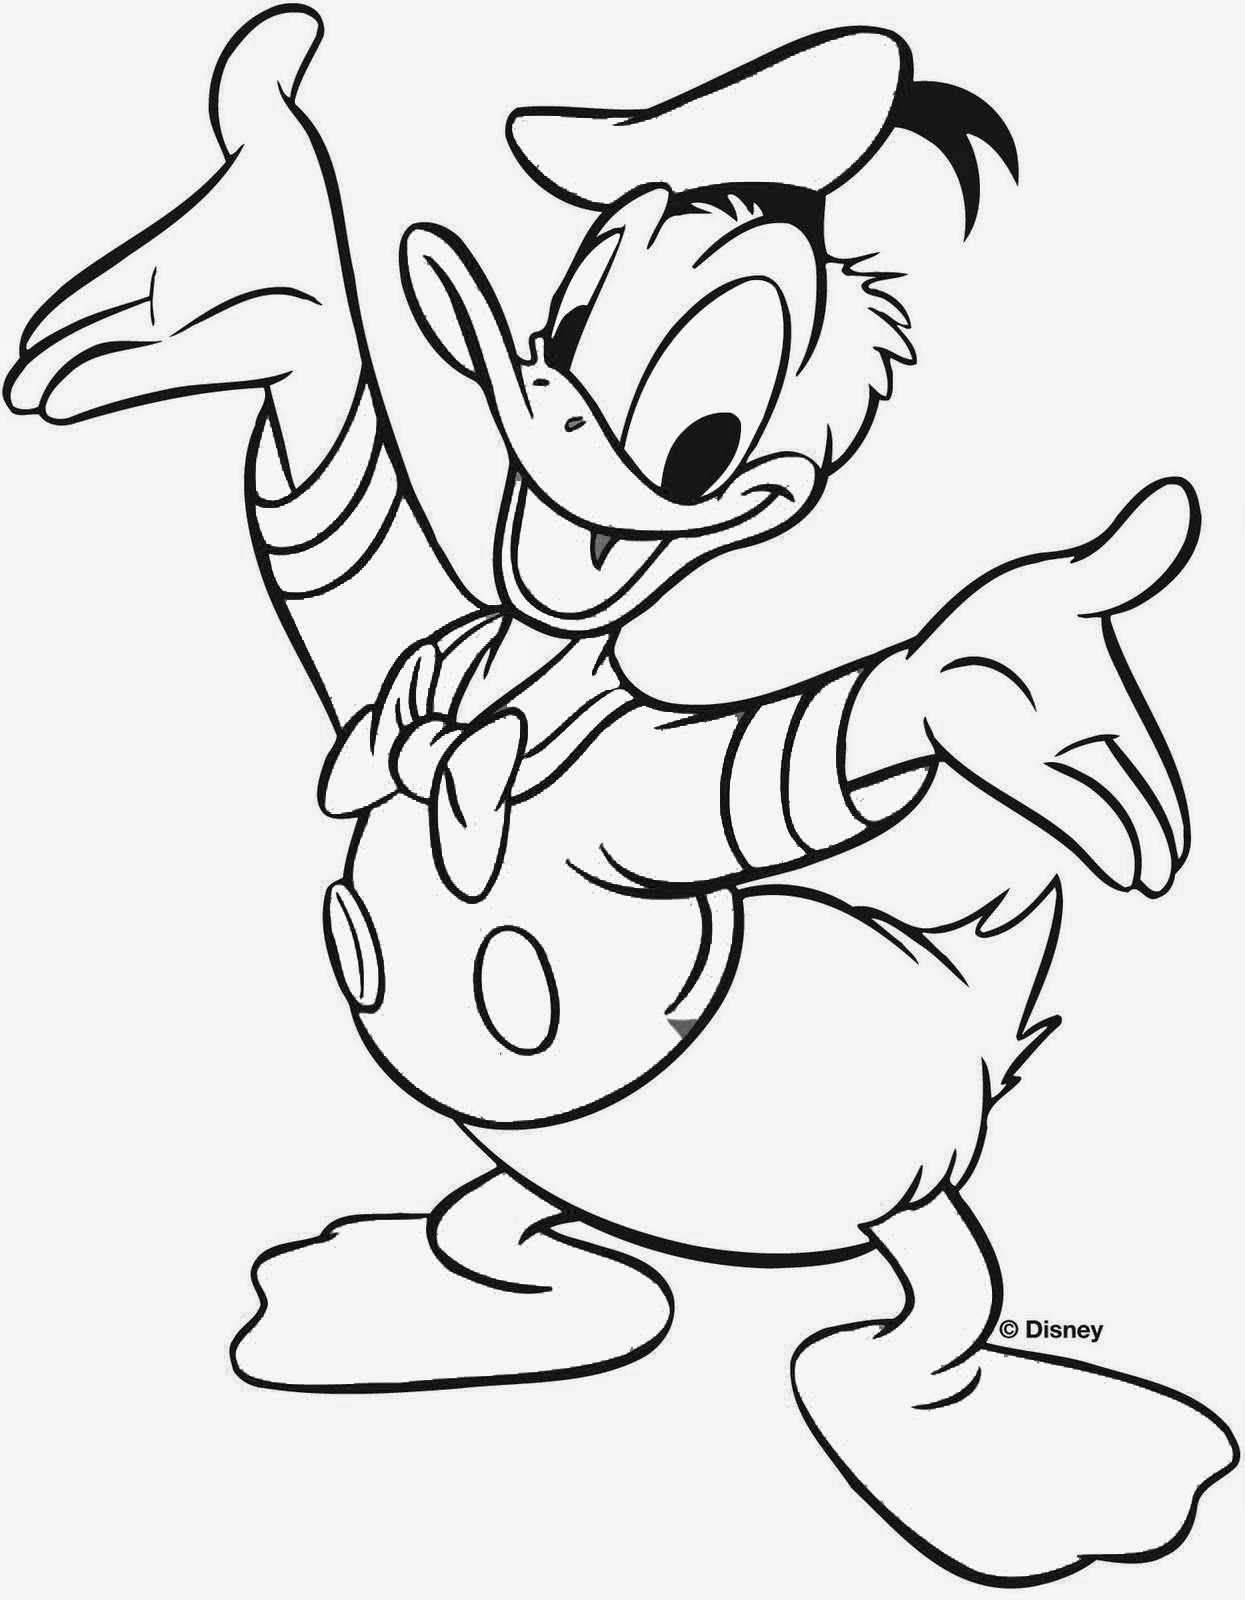 Coloring Page Duck Donald Duck Coloring Pages Donald Duck Coloring Page Komplexmittel